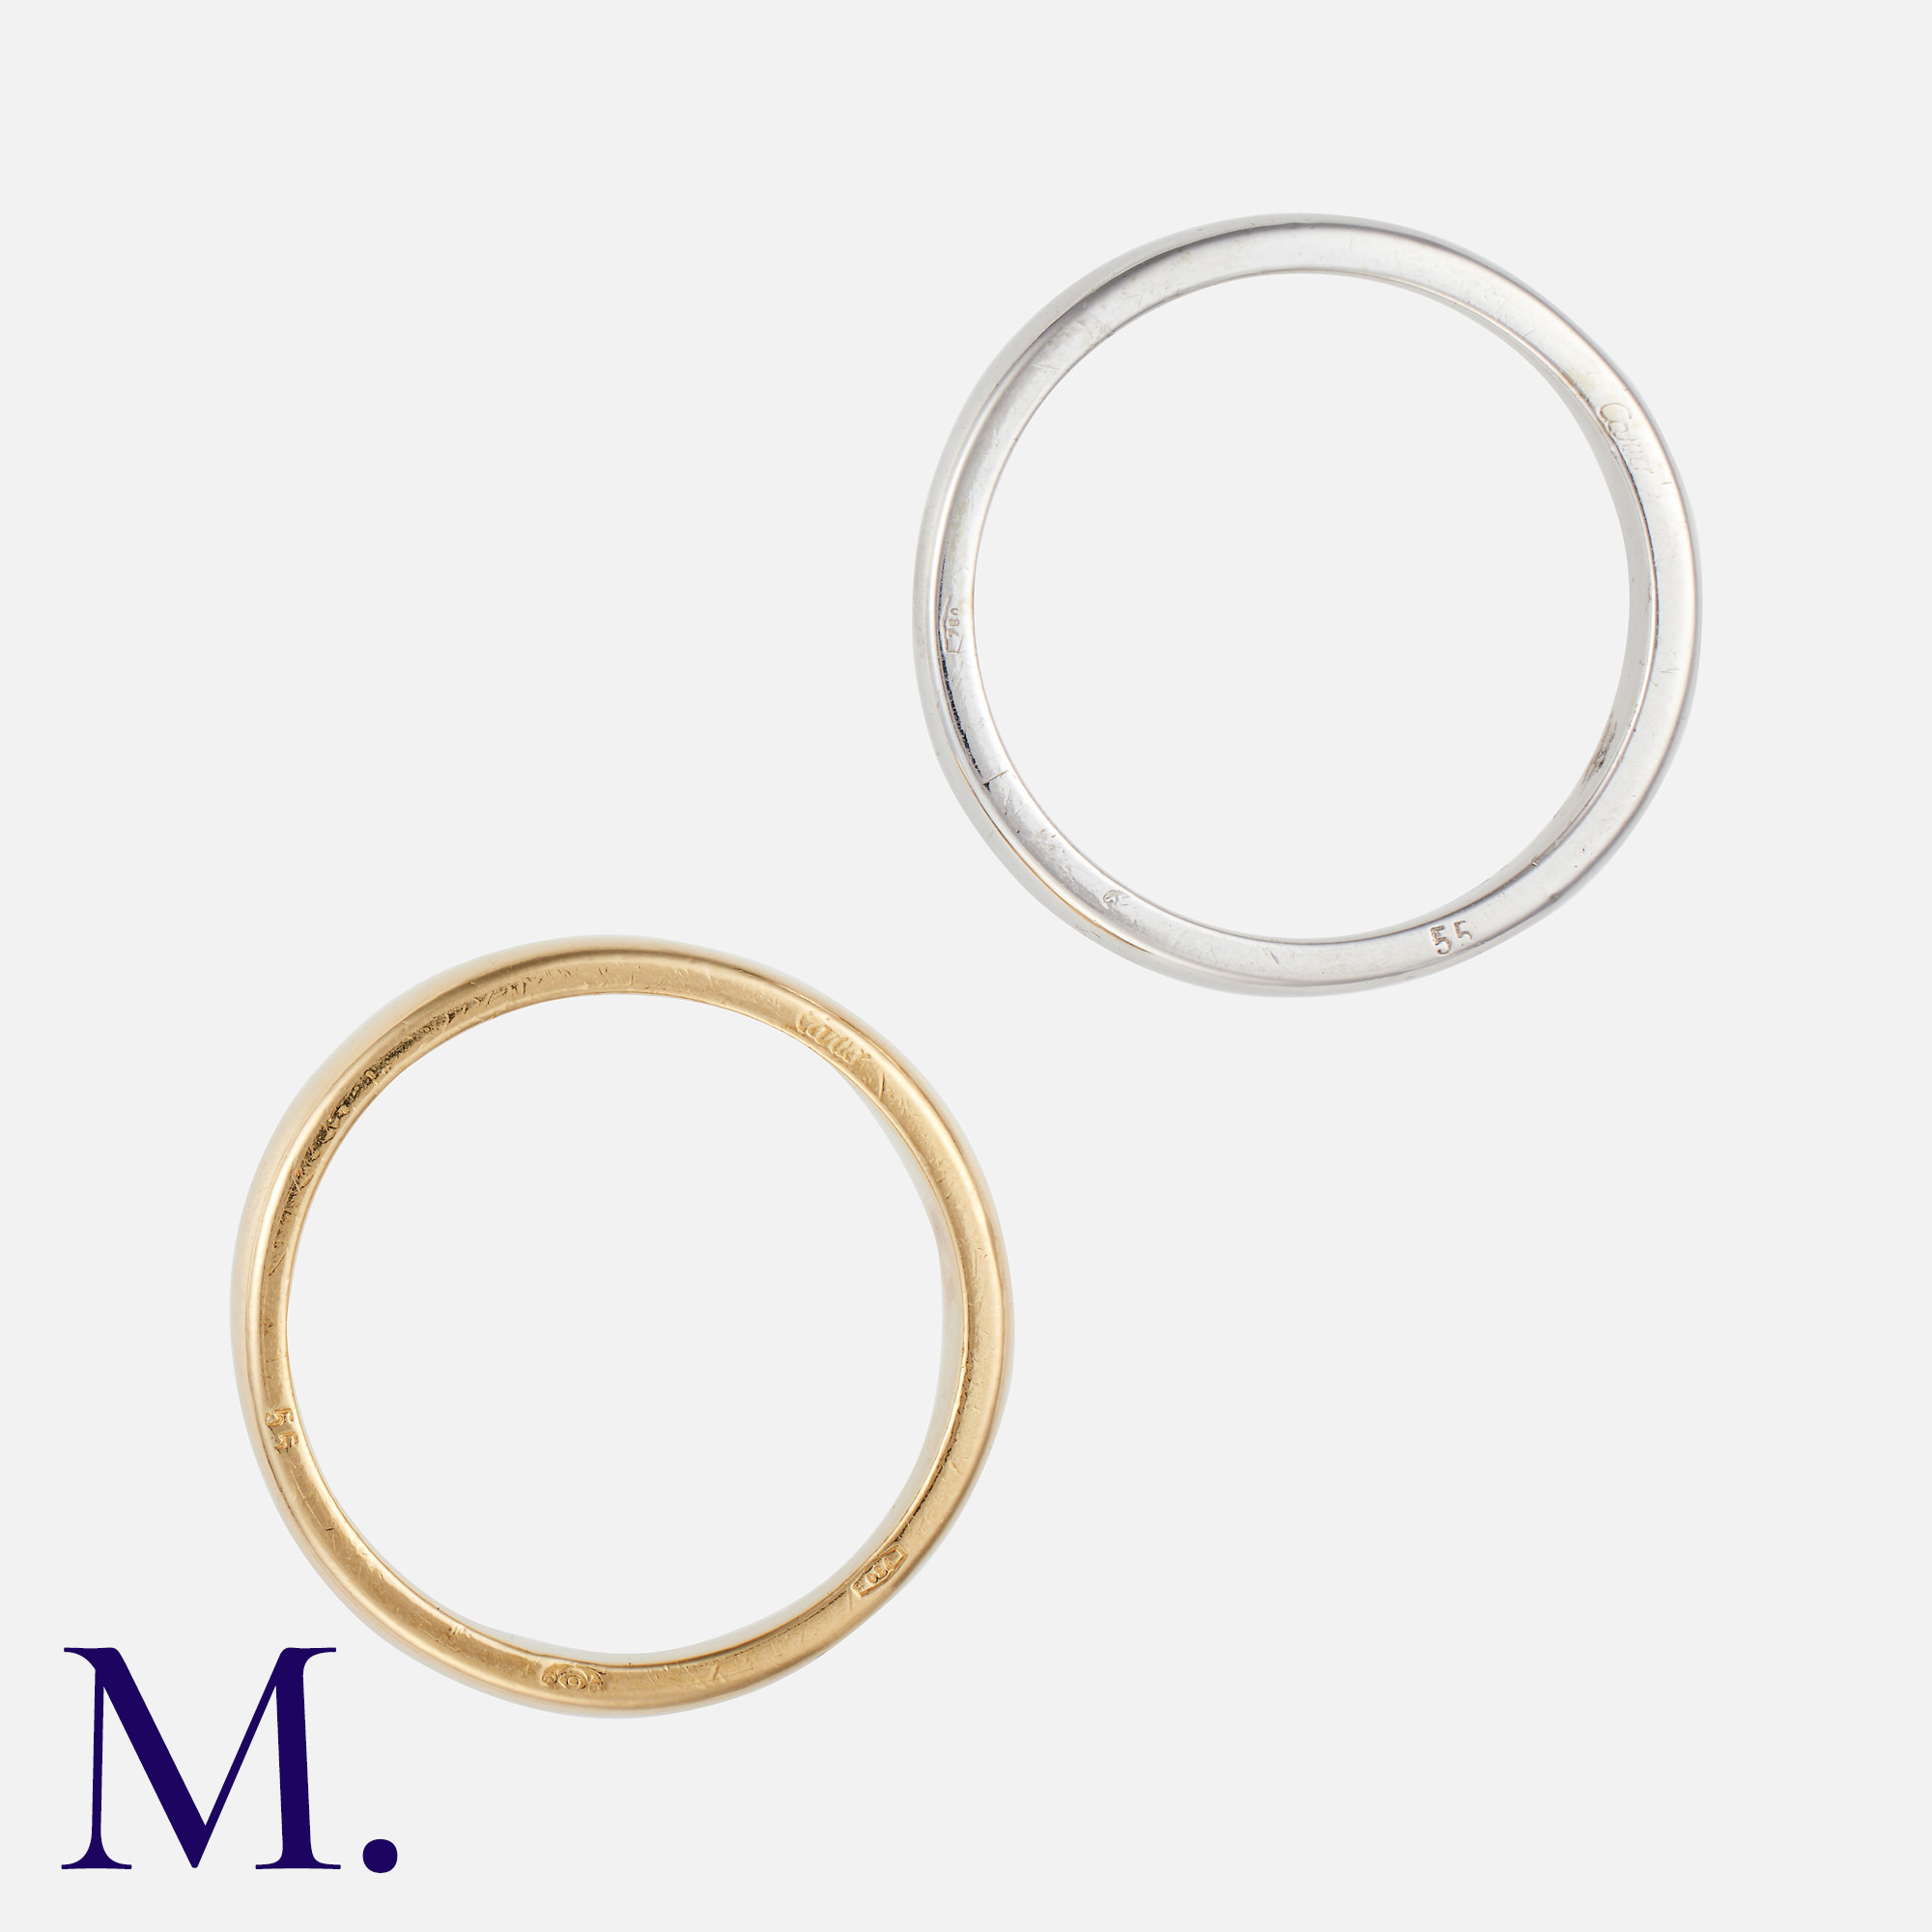 CARTIER. A Pair of Gold Wave Bands in 18K white and yellow gold, of separate interlocking bands. - Image 3 of 3